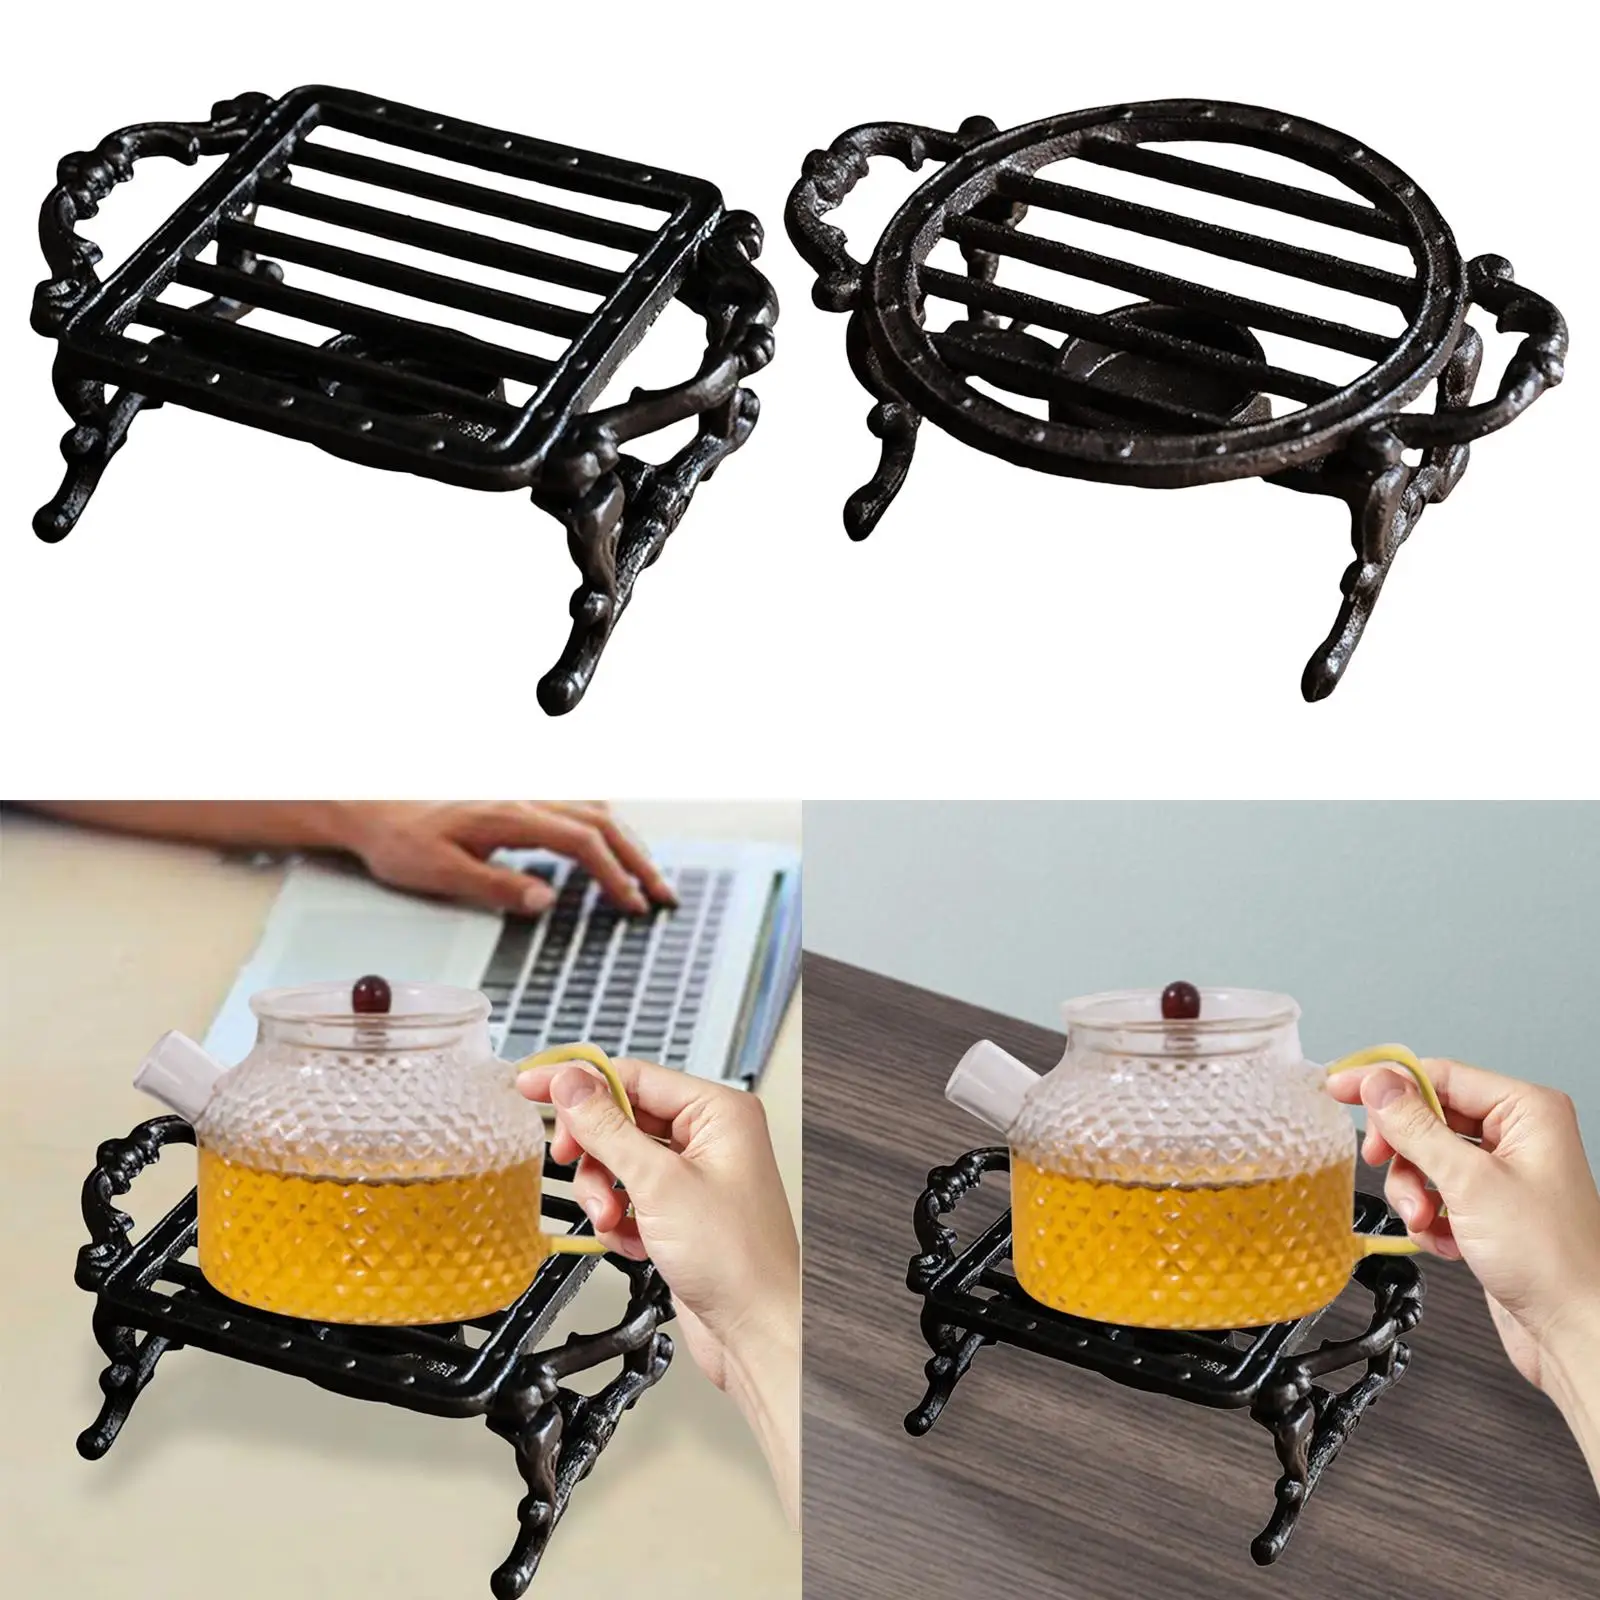 Teapot Warmer Holder Decorative Candle Holder Stands Insulation Base Teapot Warmer for Camping Travel Heatcoffee Milk or Tea